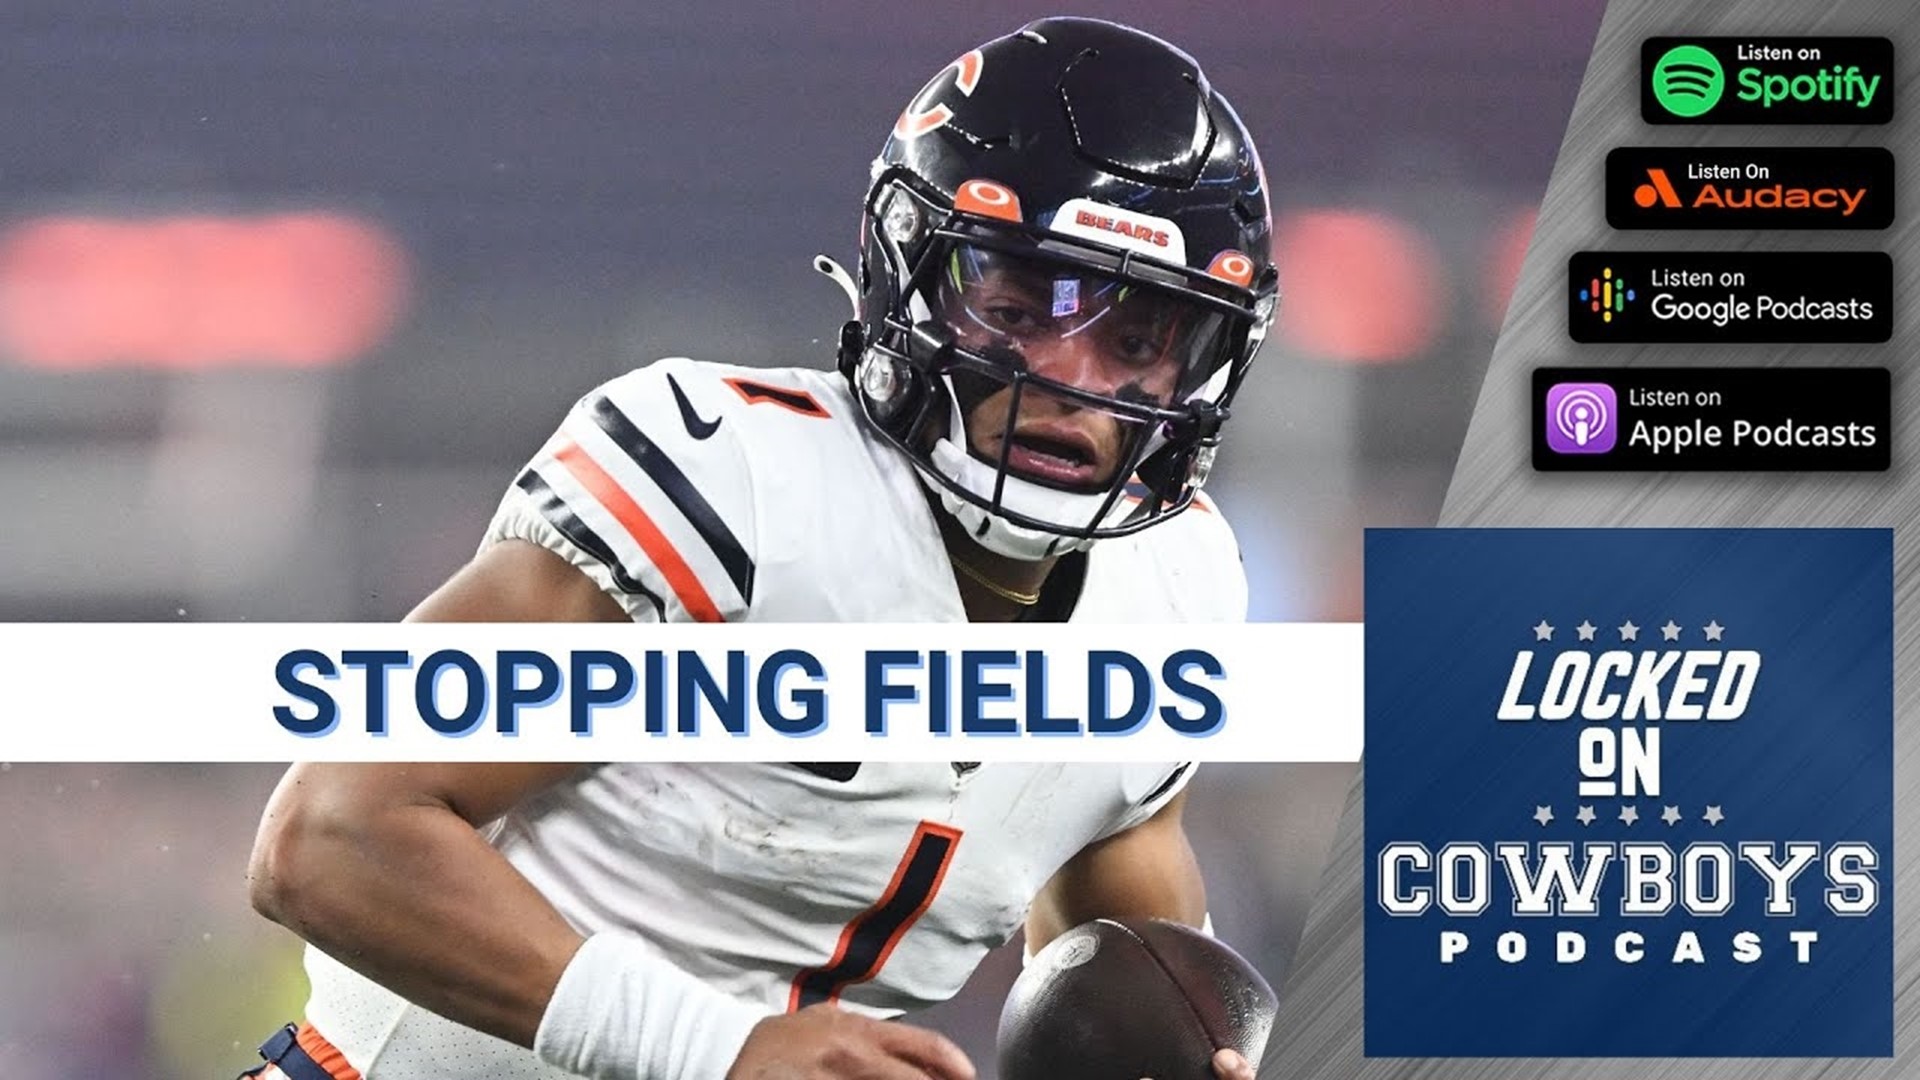 Marcus Mosher and Landon McCool discuss the Week 8 matchup between the Dallas Cowboys and the Chicago Bears.